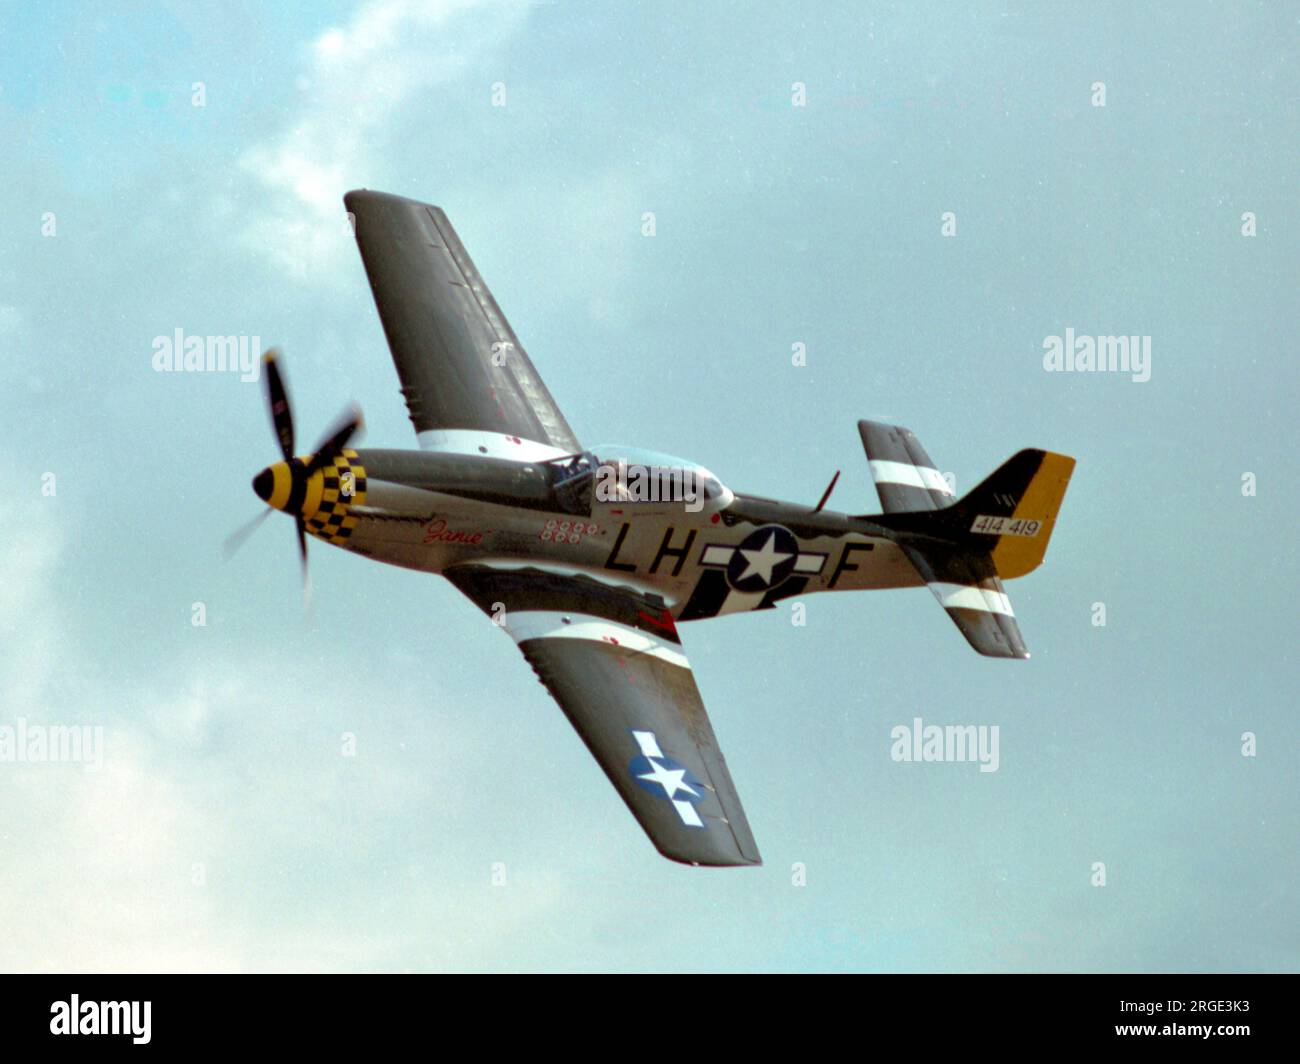 North American P-51D Mustang G-MSTG 'Janie' (msn 122-48271) Banque D'Images